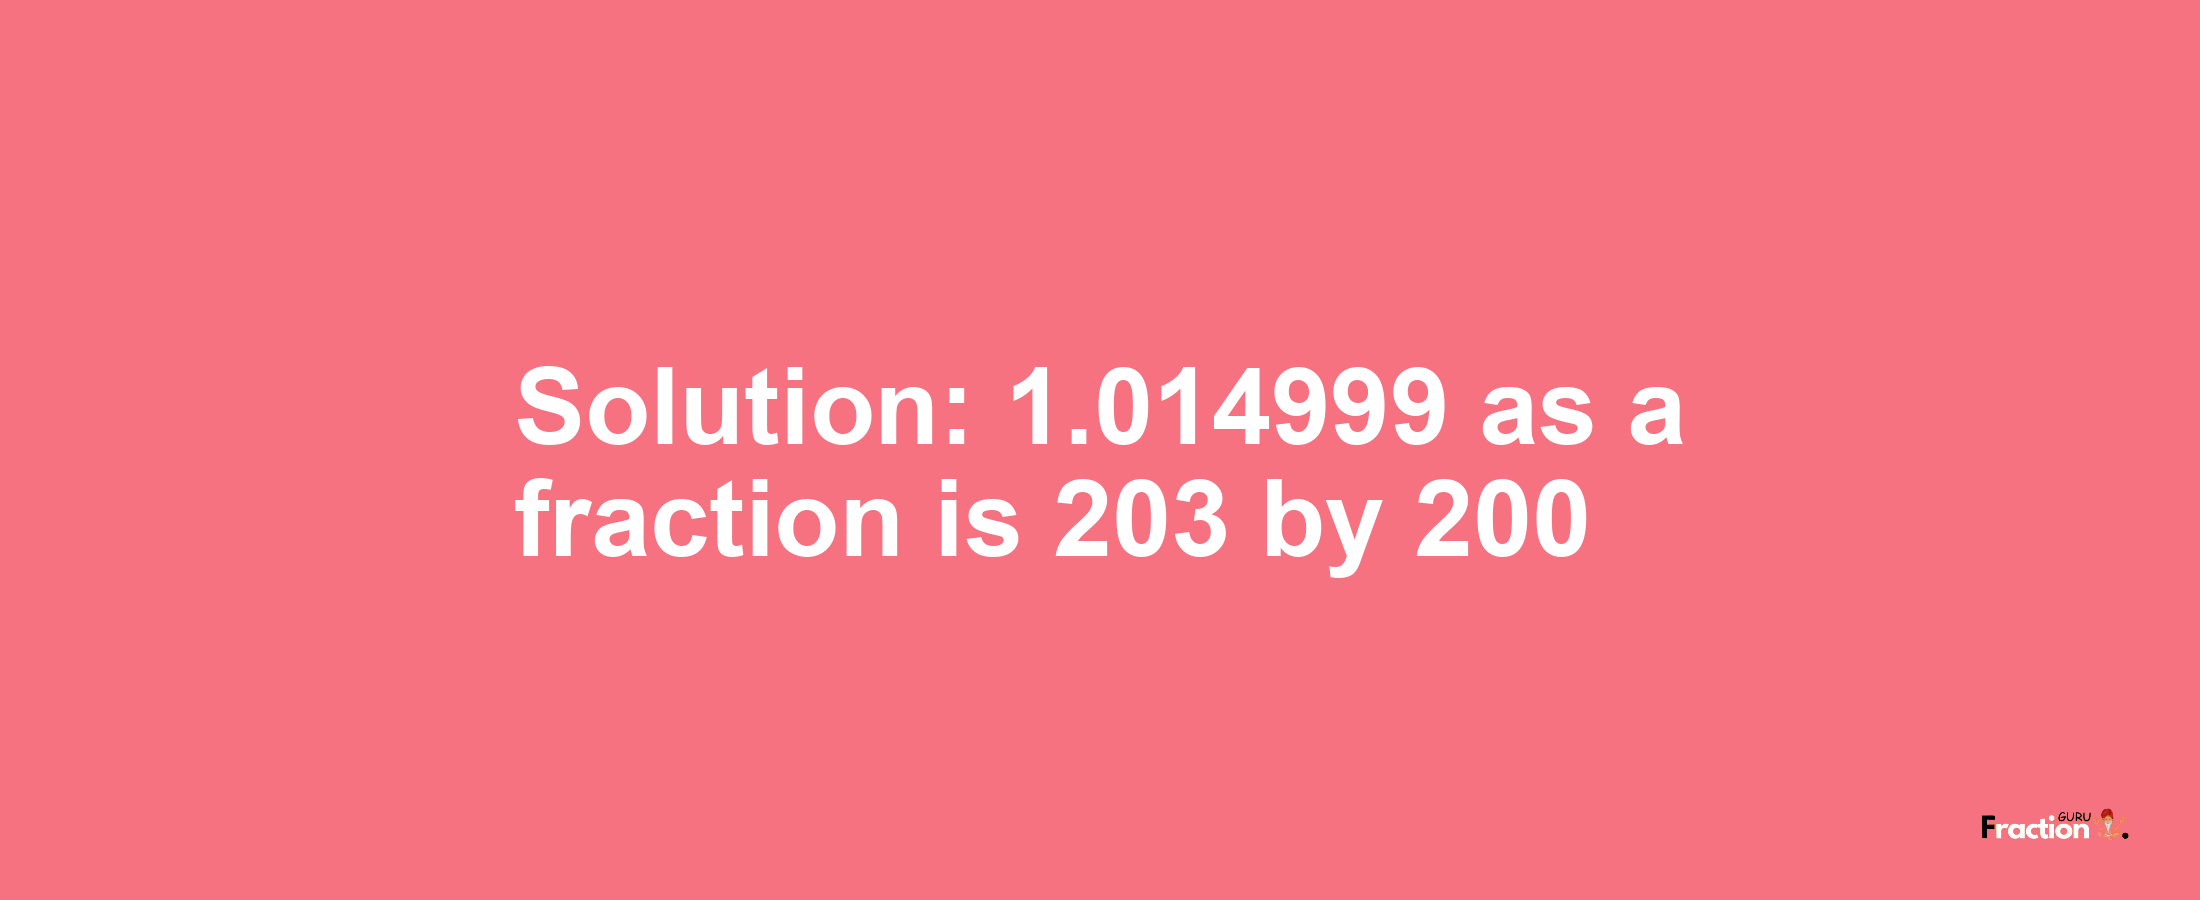 Solution:1.014999 as a fraction is 203/200